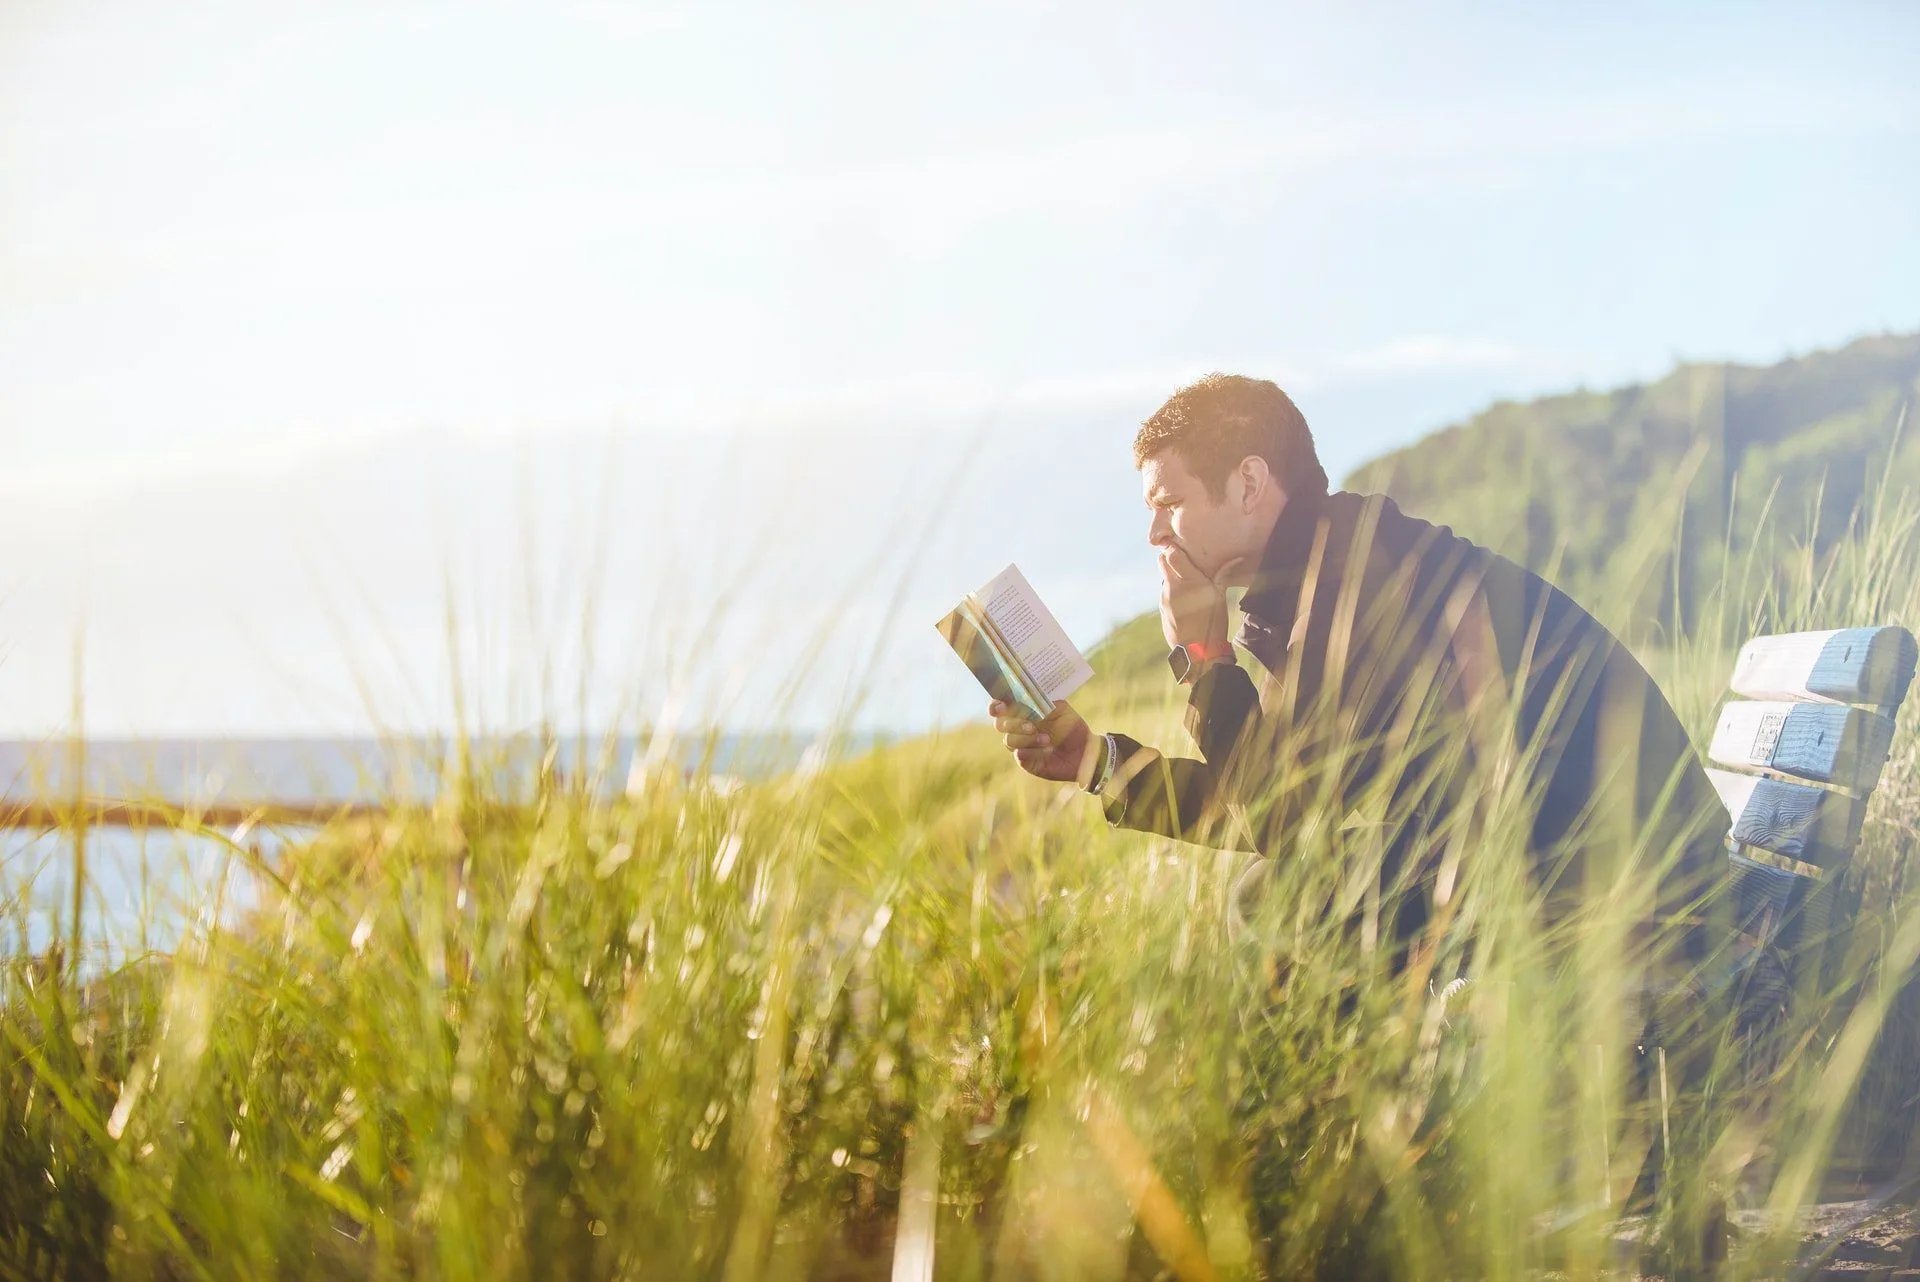 3 Good Books To Help Boost Your Health and Longevity